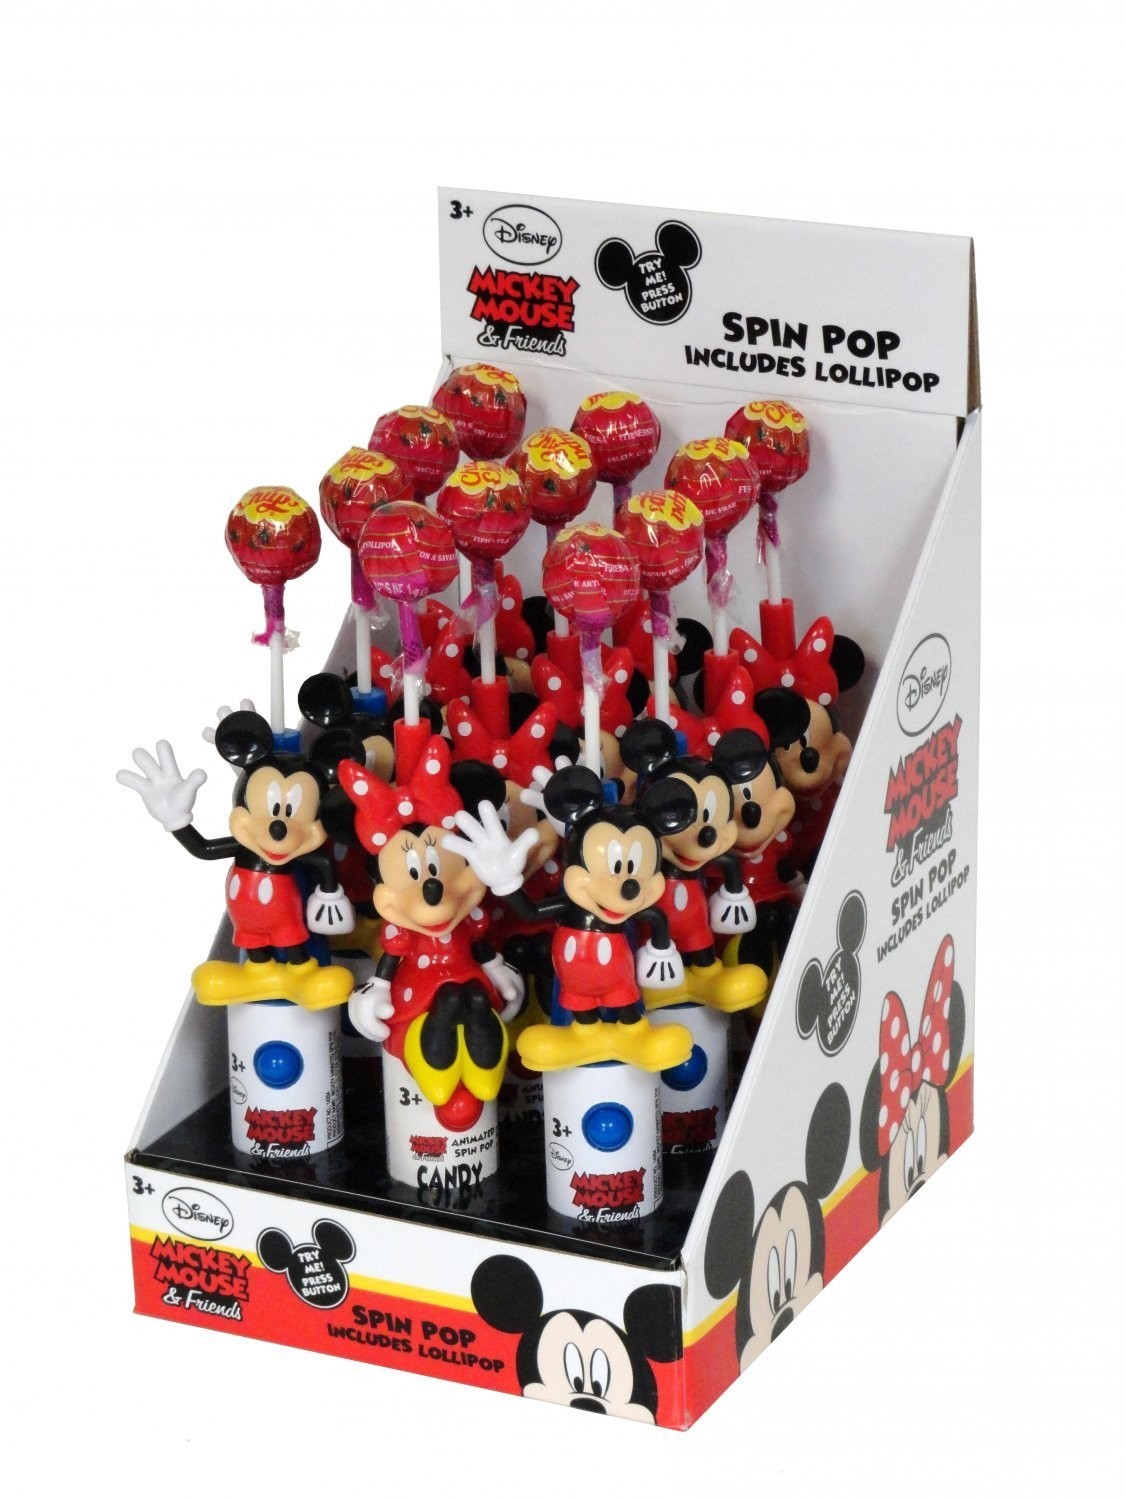 ©Disney Mickey & Friends Animated Spin Pop with candy